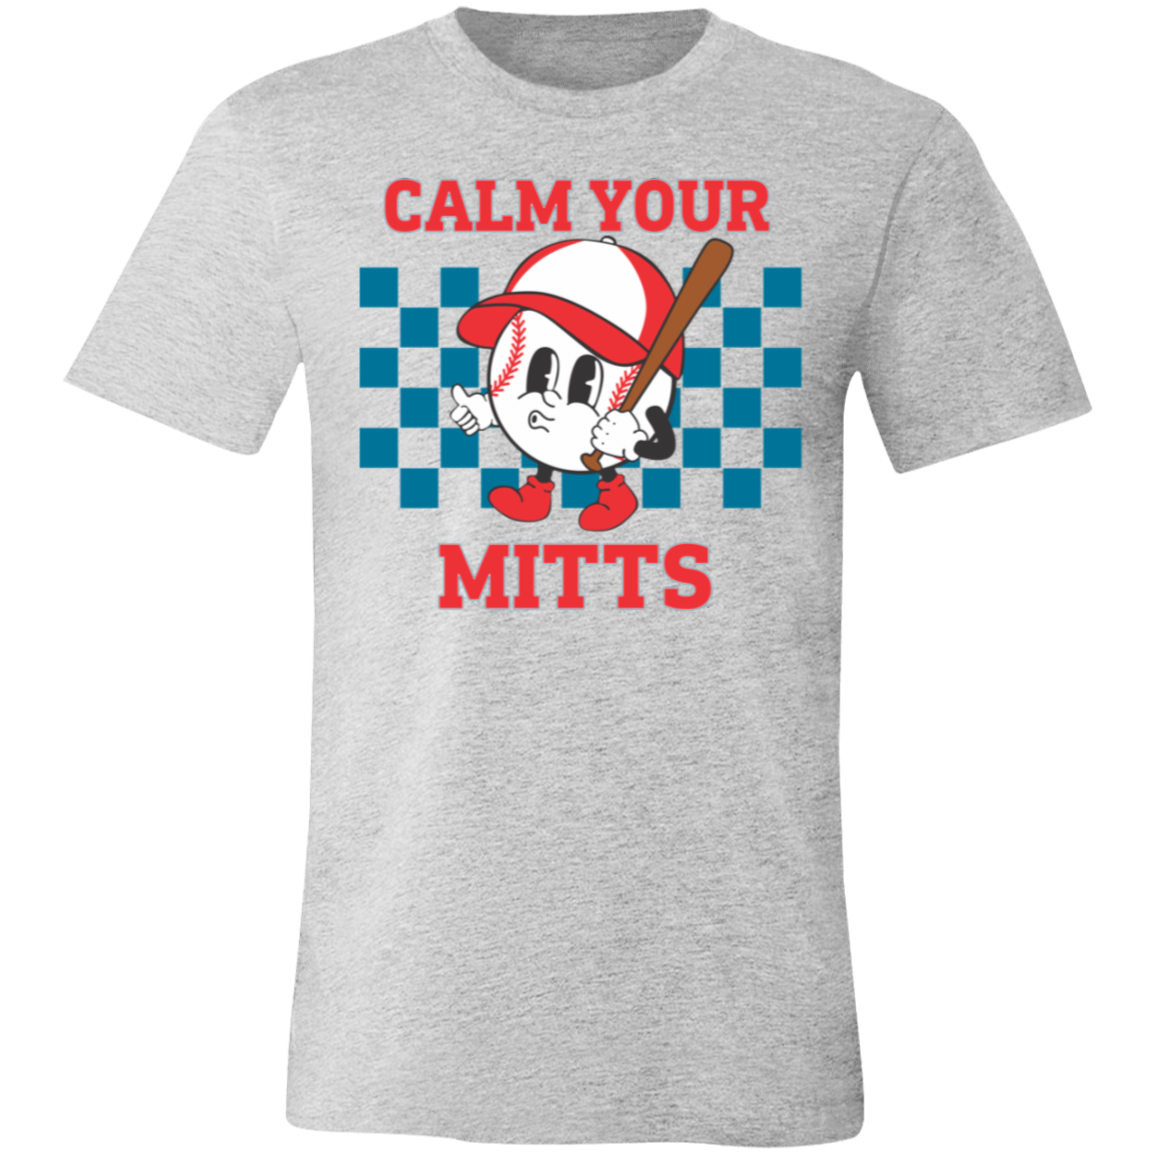 Call Your Mitts Premium Women's Tee - Game Day Getup